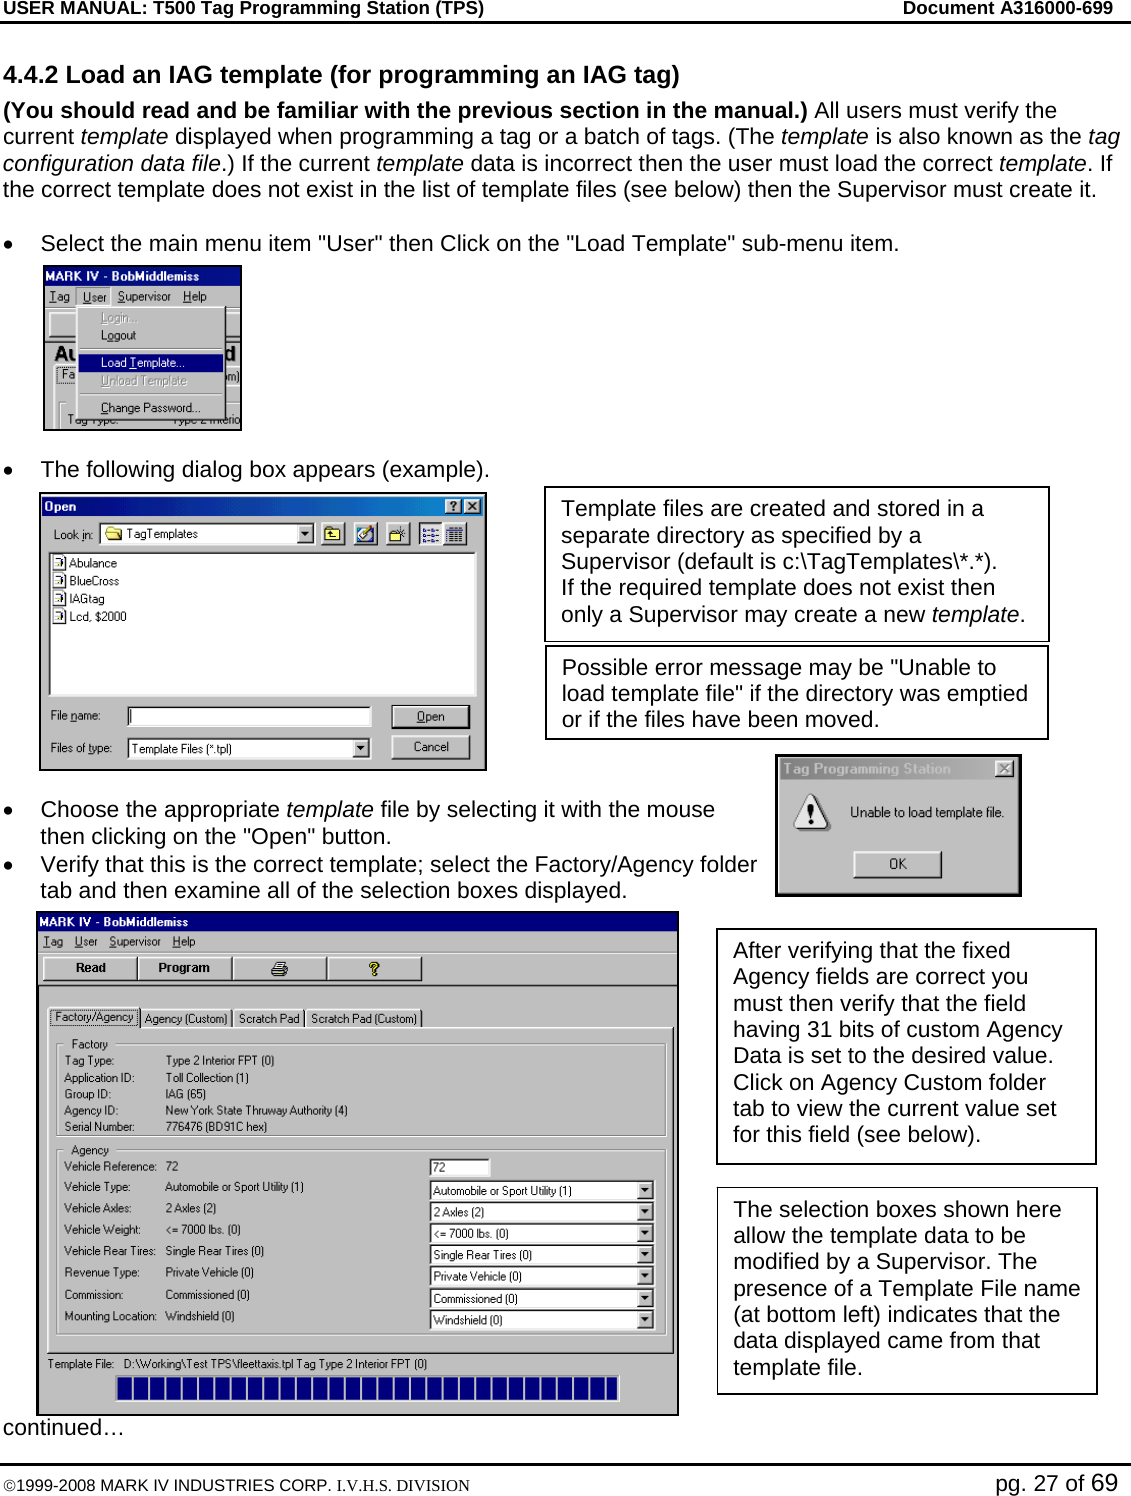 USER MANUAL: T500 Tag Programming Station (TPS)     Document A316000-699  ©1999-2008 MARK IV INDUSTRIES CORP. I.V.H.S. DIVISION   pg. 27 of 69 4.4.2 Load an IAG template (for programming an IAG tag) (You should read and be familiar with the previous section in the manual.) All users must verify the current template displayed when programming a tag or a batch of tags. (The template is also known as the tag configuration data file.) If the current template data is incorrect then the user must load the correct template. If the correct template does not exist in the list of template files (see below) then the Supervisor must create it.  •  Select the main menu item &quot;User&quot; then Click on the &quot;Load Template&quot; sub-menu item.  •  The following dialog box appears (example).  •  Choose the appropriate template file by selecting it with the mouse then clicking on the &quot;Open&quot; button.  •  Verify that this is the correct template; select the Factory/Agency folder tab and then examine all of the selection boxes displayed.  continued… Template files are created and stored in a separate directory as specified by a Supervisor (default is c:\TagTemplates\*.*). If the required template does not exist then only a Supervisor may create a new template. Possible error message may be &quot;Unable to load template file&quot; if the directory was emptied or if the files have been moved. After verifying that the fixed Agency fields are correct you must then verify that the field having 31 bits of custom Agency Data is set to the desired value. Click on Agency Custom folder tab to view the current value set for this field (see below). The selection boxes shown here allow the template data to be modified by a Supervisor. The presence of a Template File name (at bottom left) indicates that the data displayed came from that template file. 